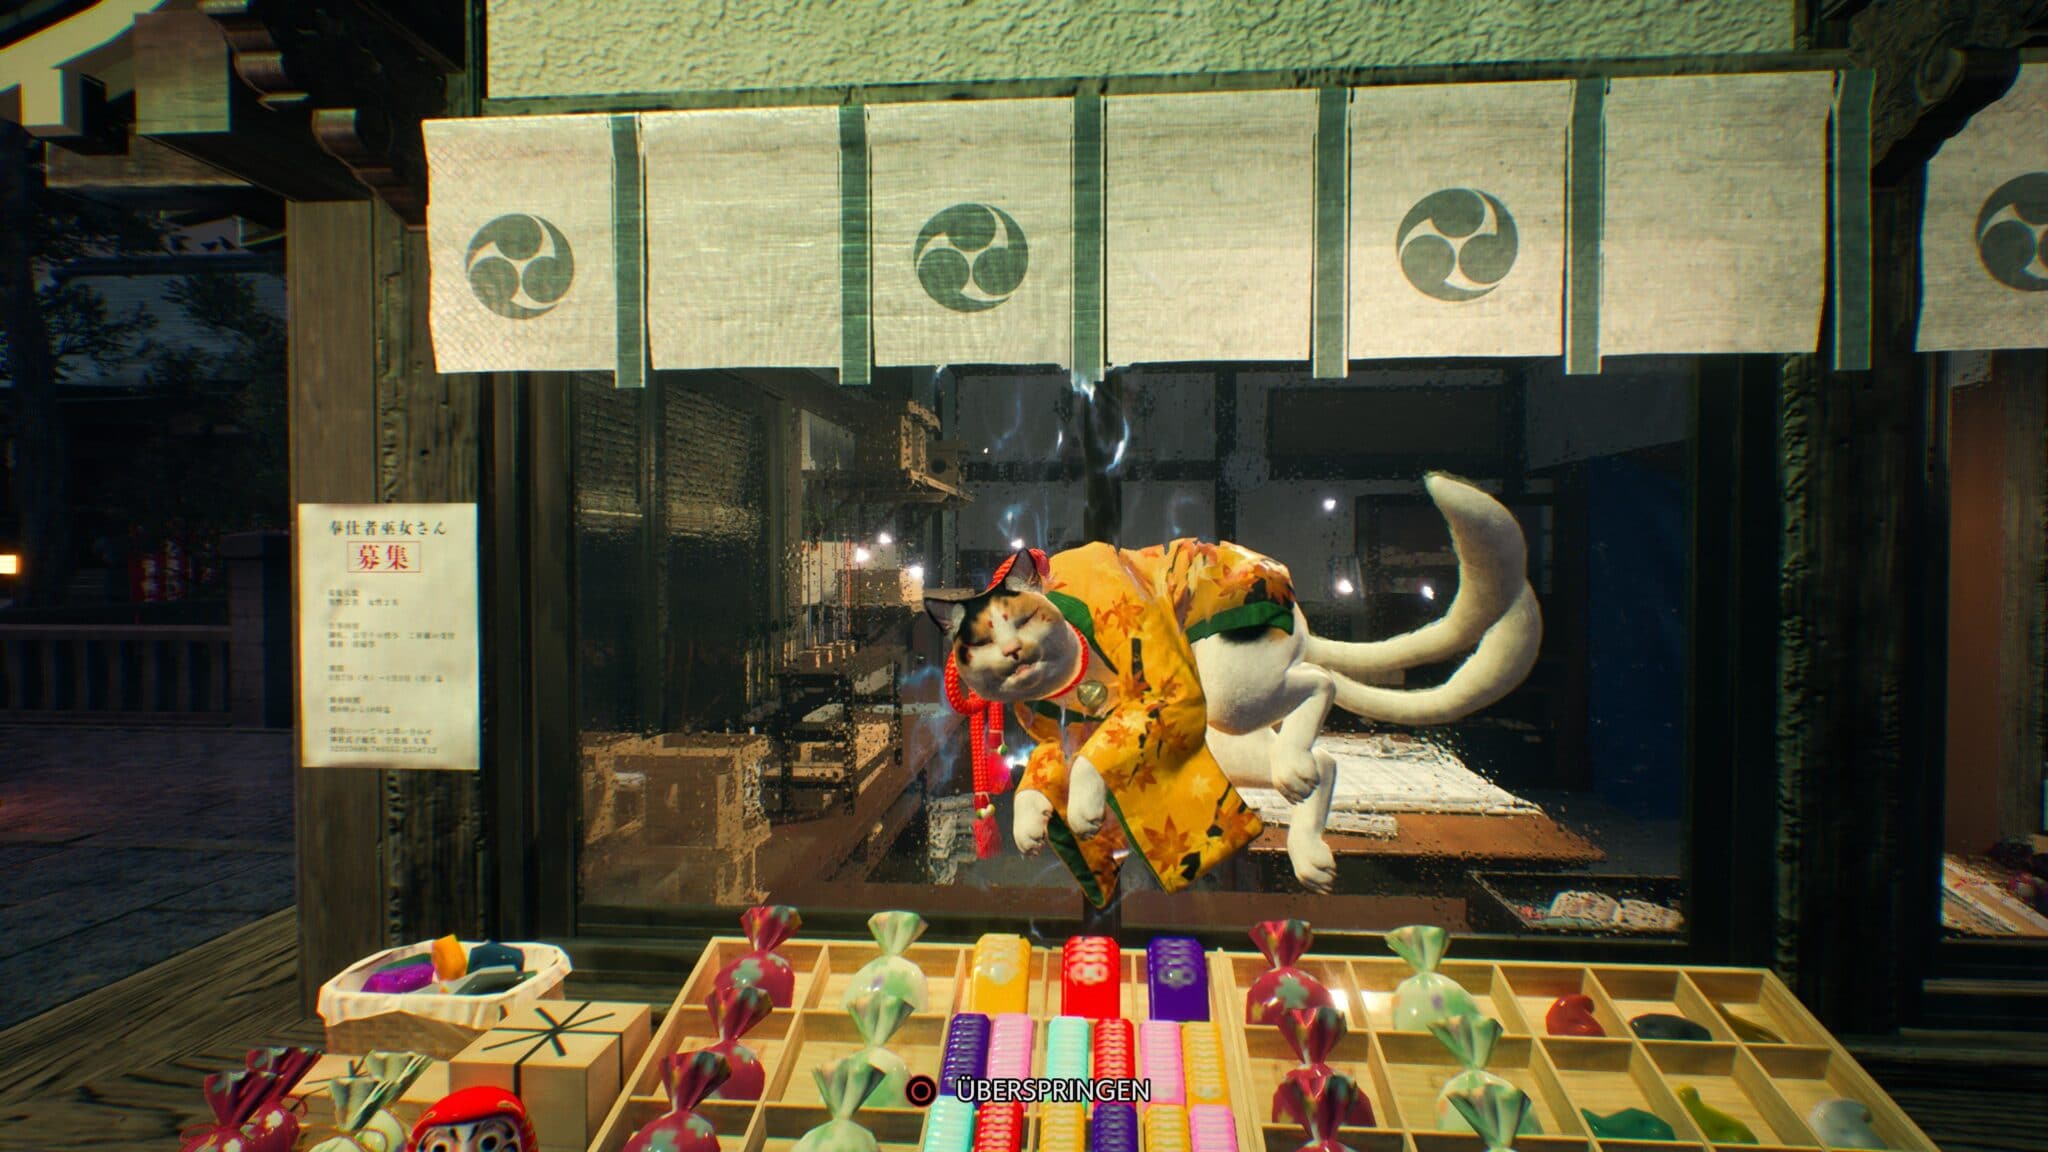 There are also merchants in Ghostwire Tokyo, albeit in a slightly different form. In addition to healing items, the hairy sellers also have clothes on offer.